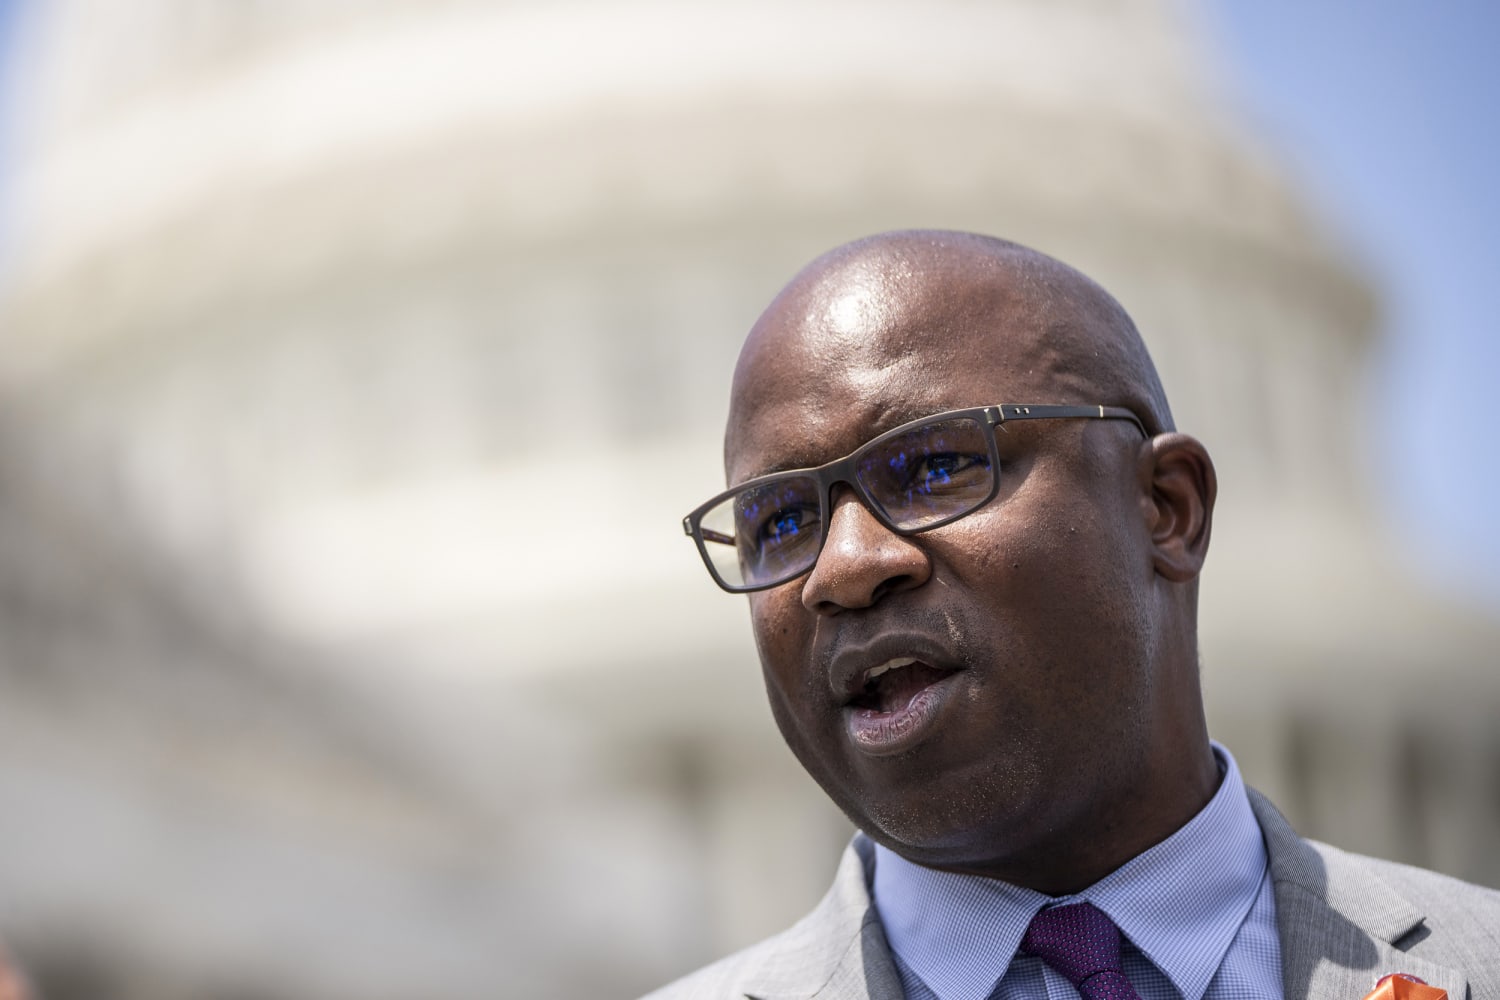 TikTok lands first major ally on Capitol Hill: Democratic Rep. Jamaal Bowman